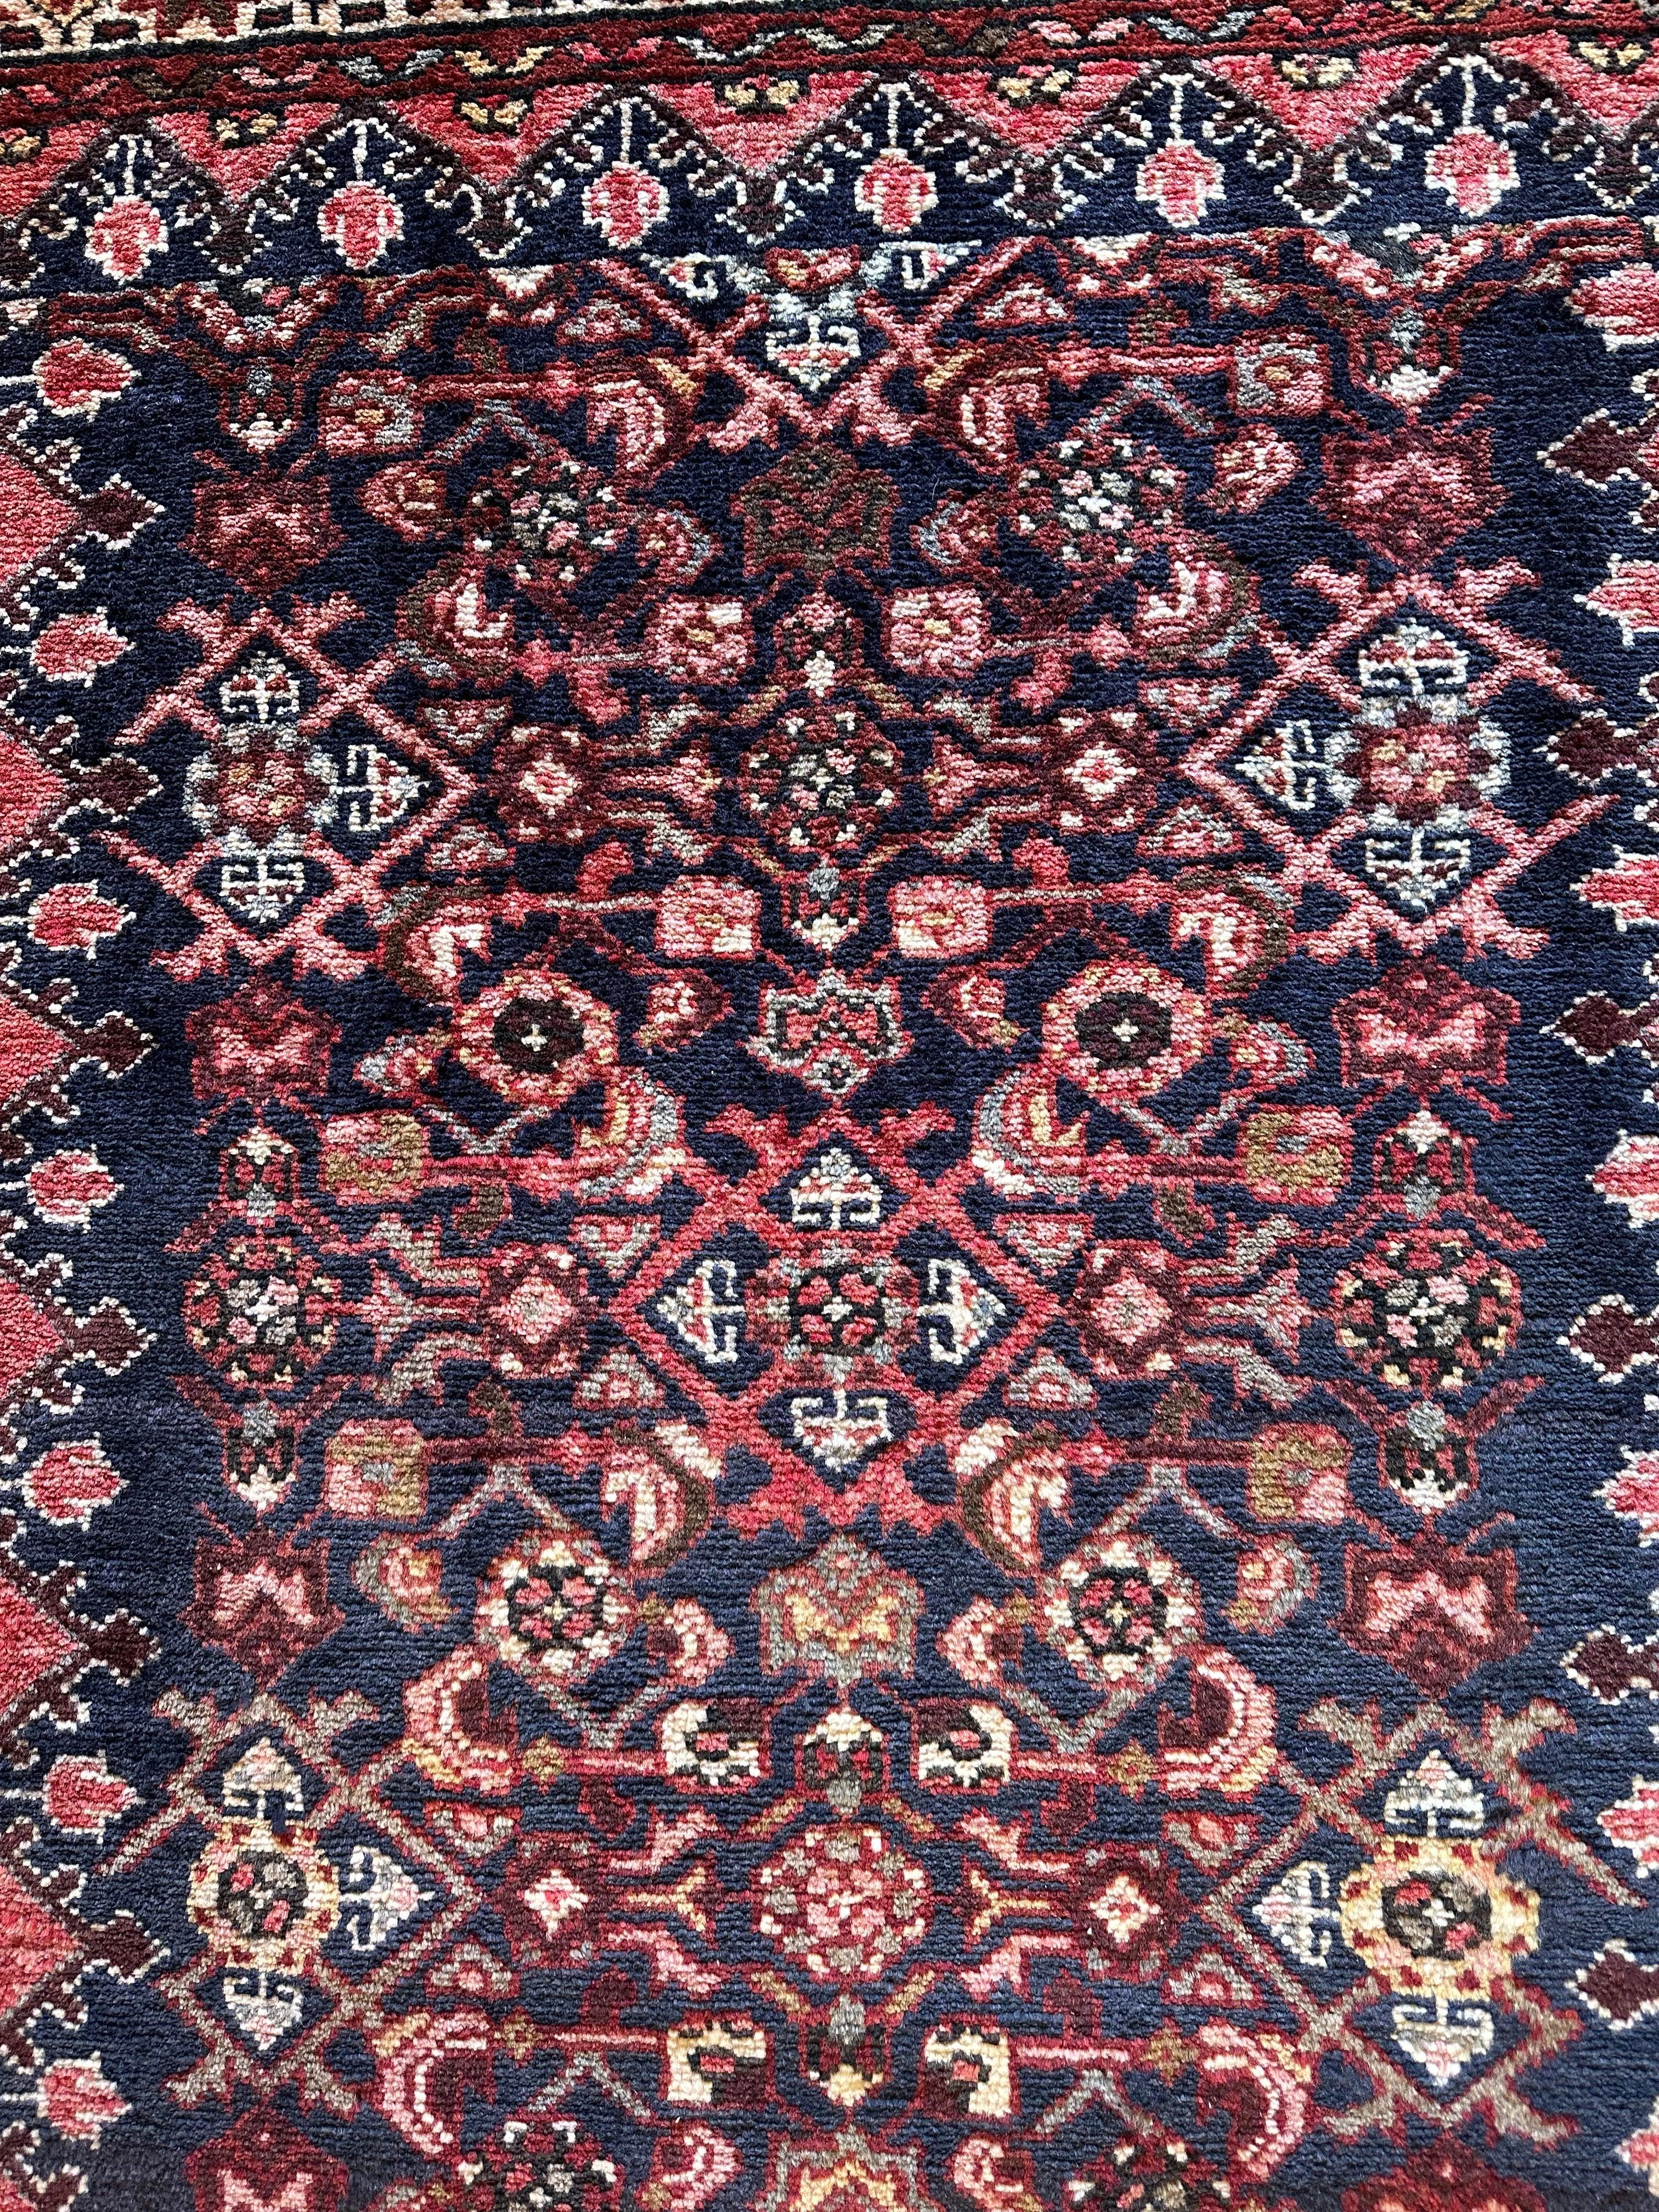 Hand-Knotted Large Persian Runner 13’9” x 3’7”